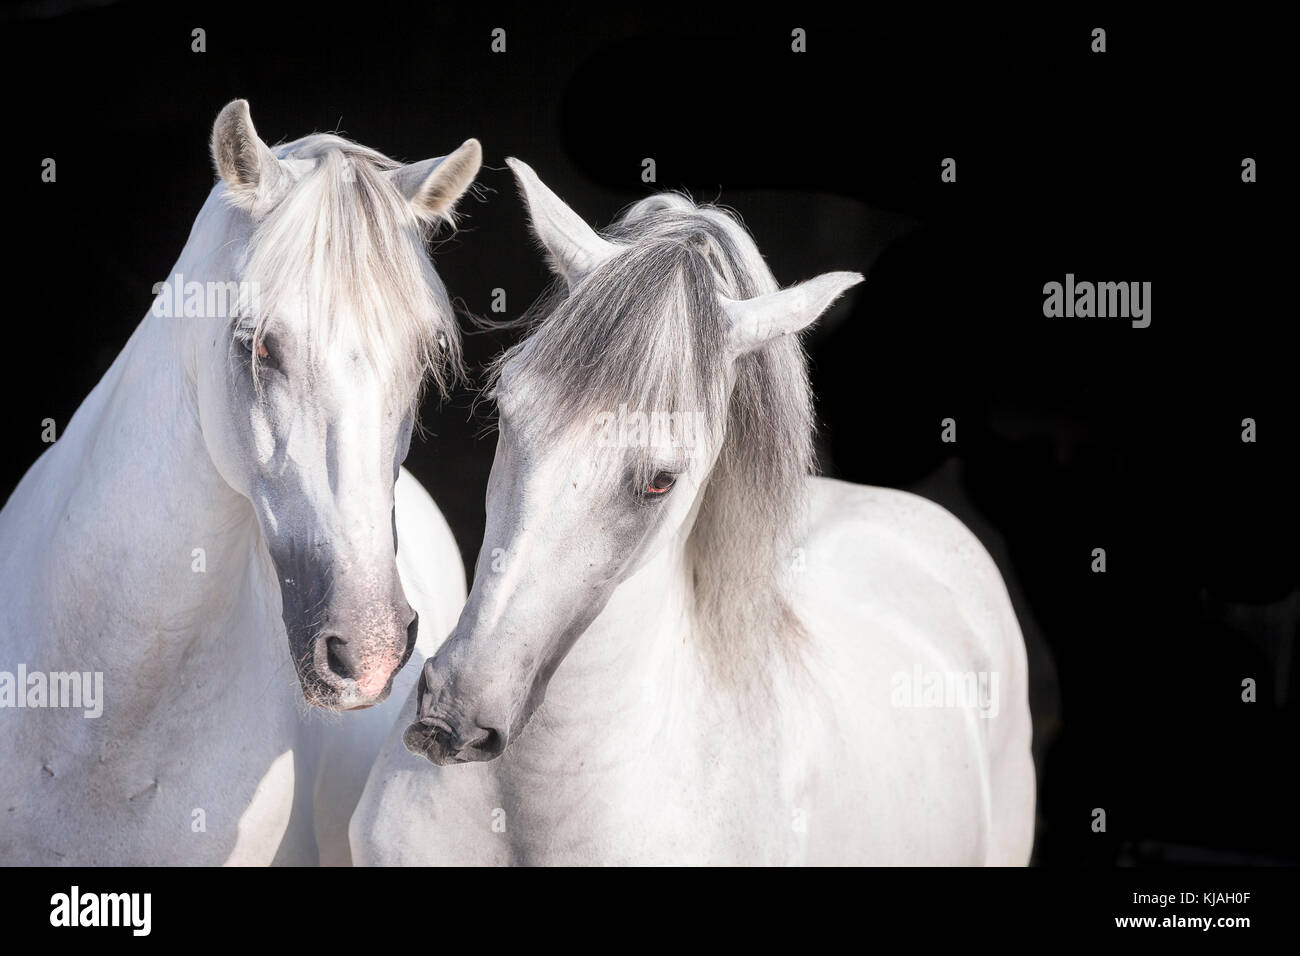 Pure Spanish Horse, Andalusian. Portrait of two gray stallions, seen against a black background. Germany Stock Photo